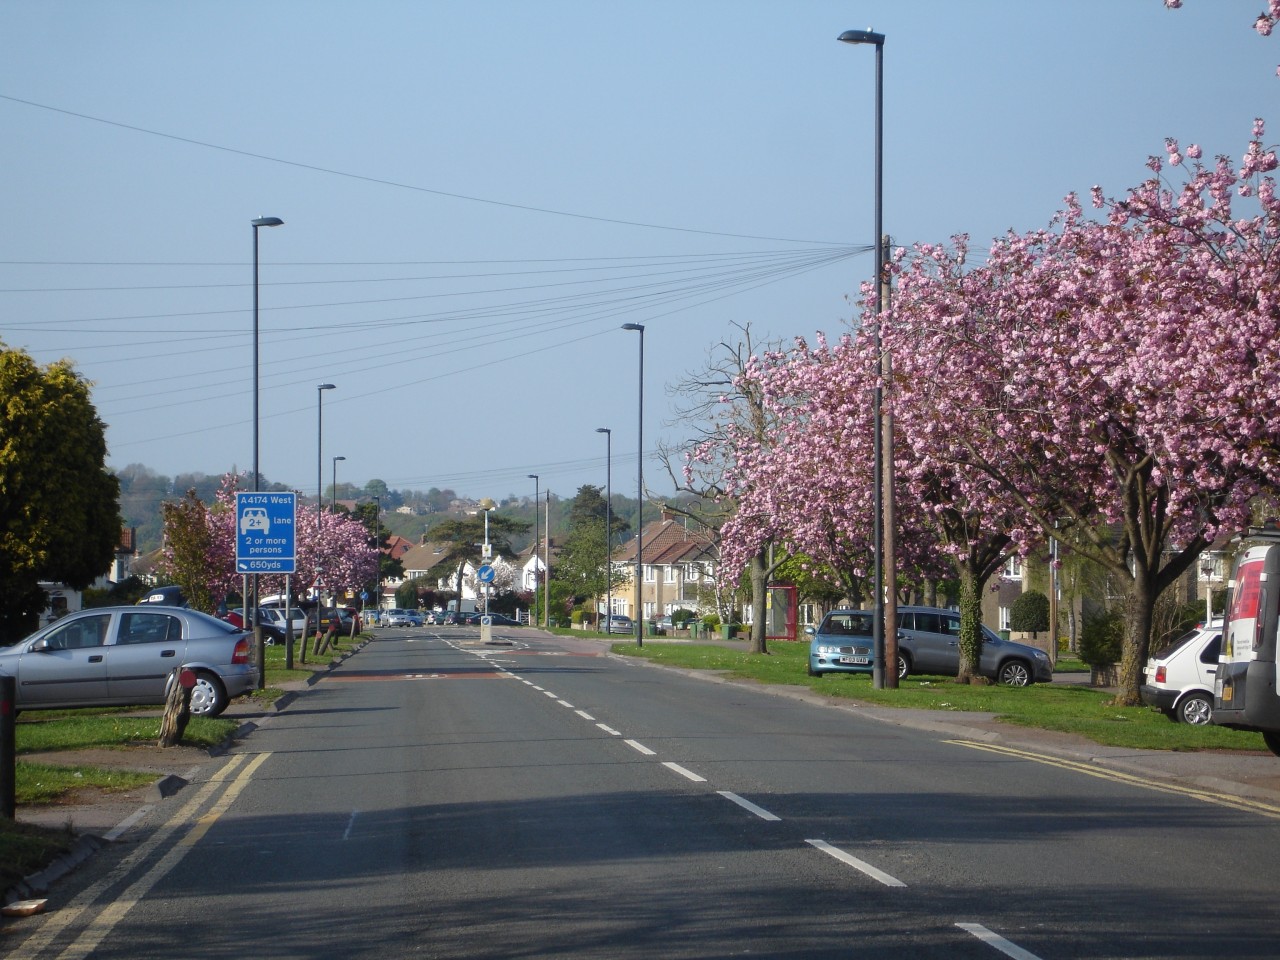 A view looking down Bromley Heath road with the Cherry trees in full Blossom.